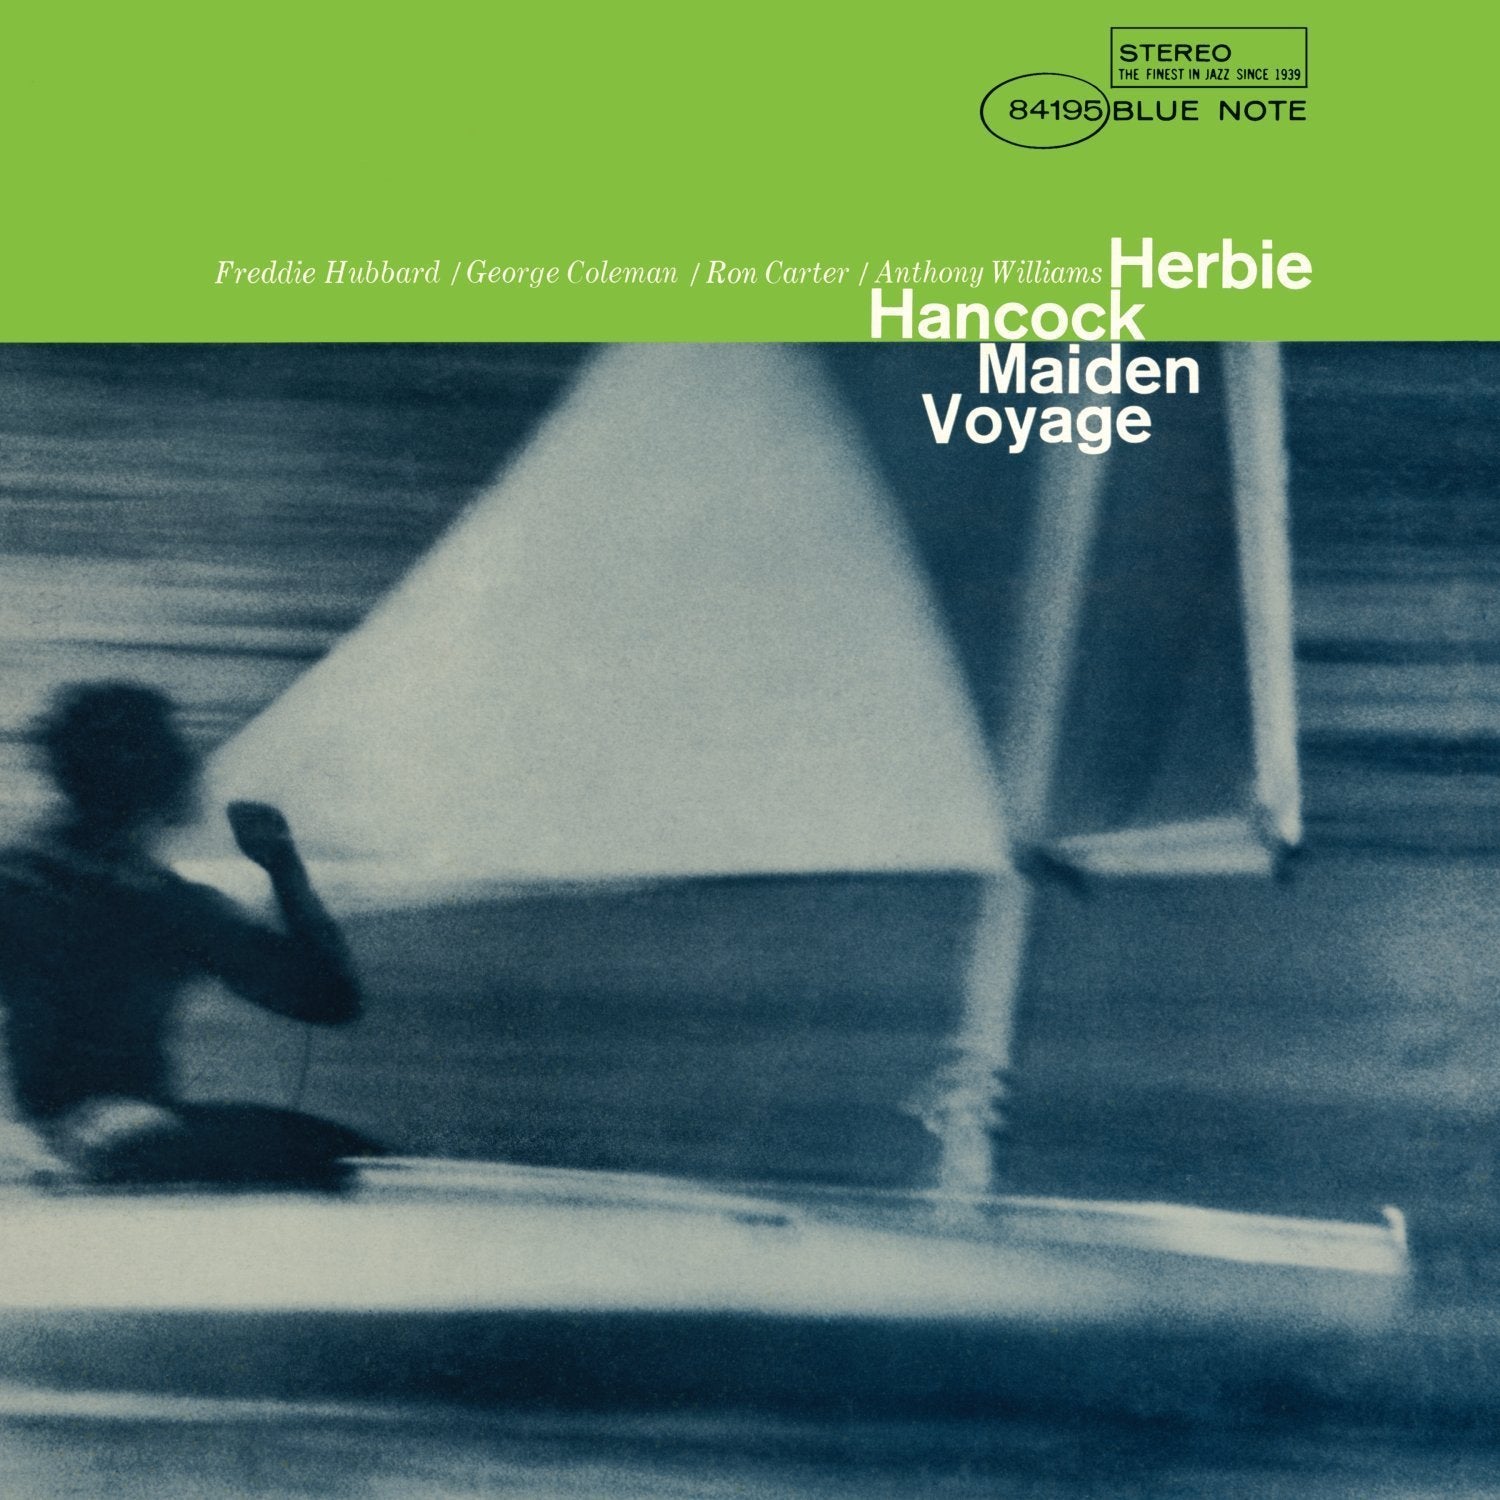 Herbie Hancock  "Maiden Voyage" [All Analog] [Blue Note Classic Series]